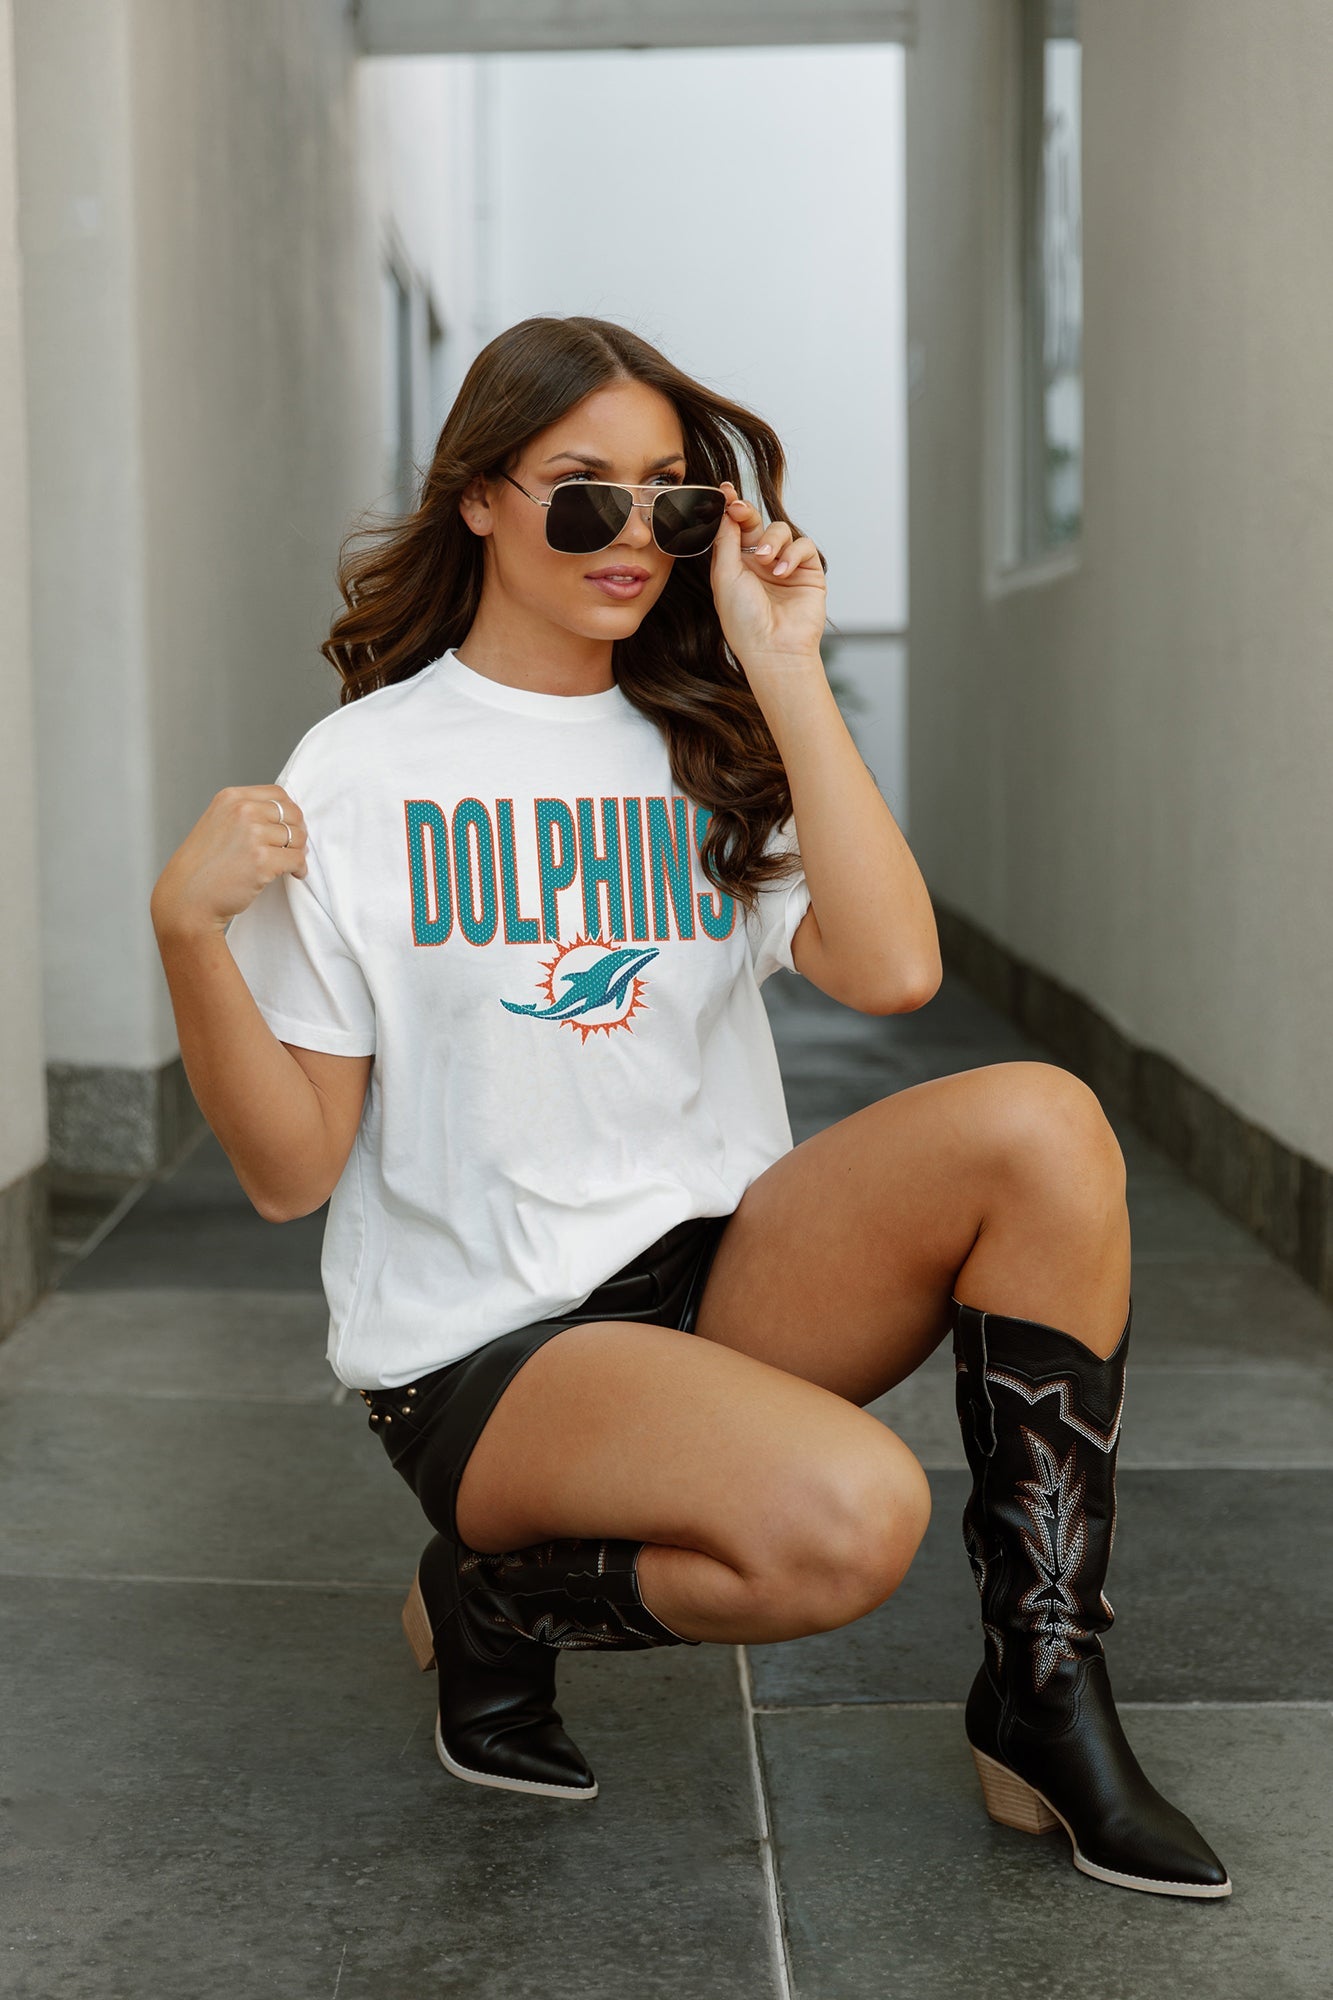 Women's Gameday Couture Gray Miami Dolphins Nothing But The